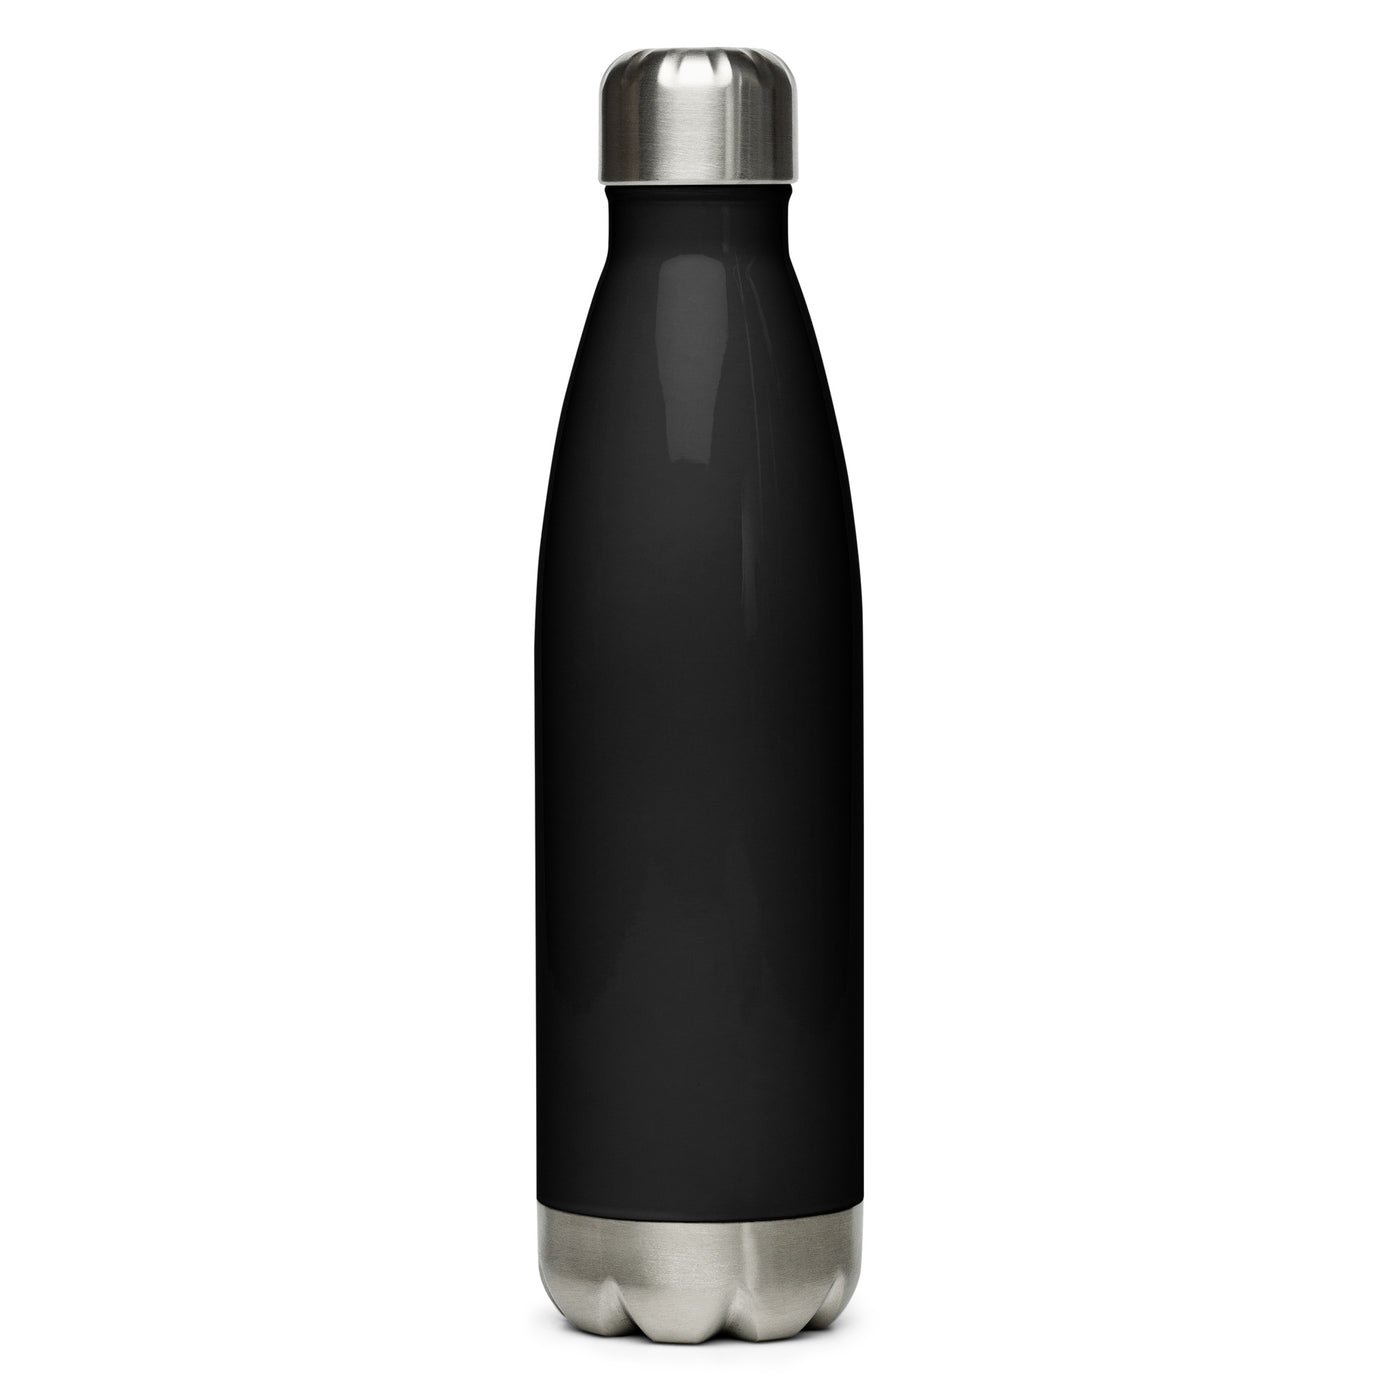 Fat Girls, Gays, and Theys Can Stainless Steel Water Bottle